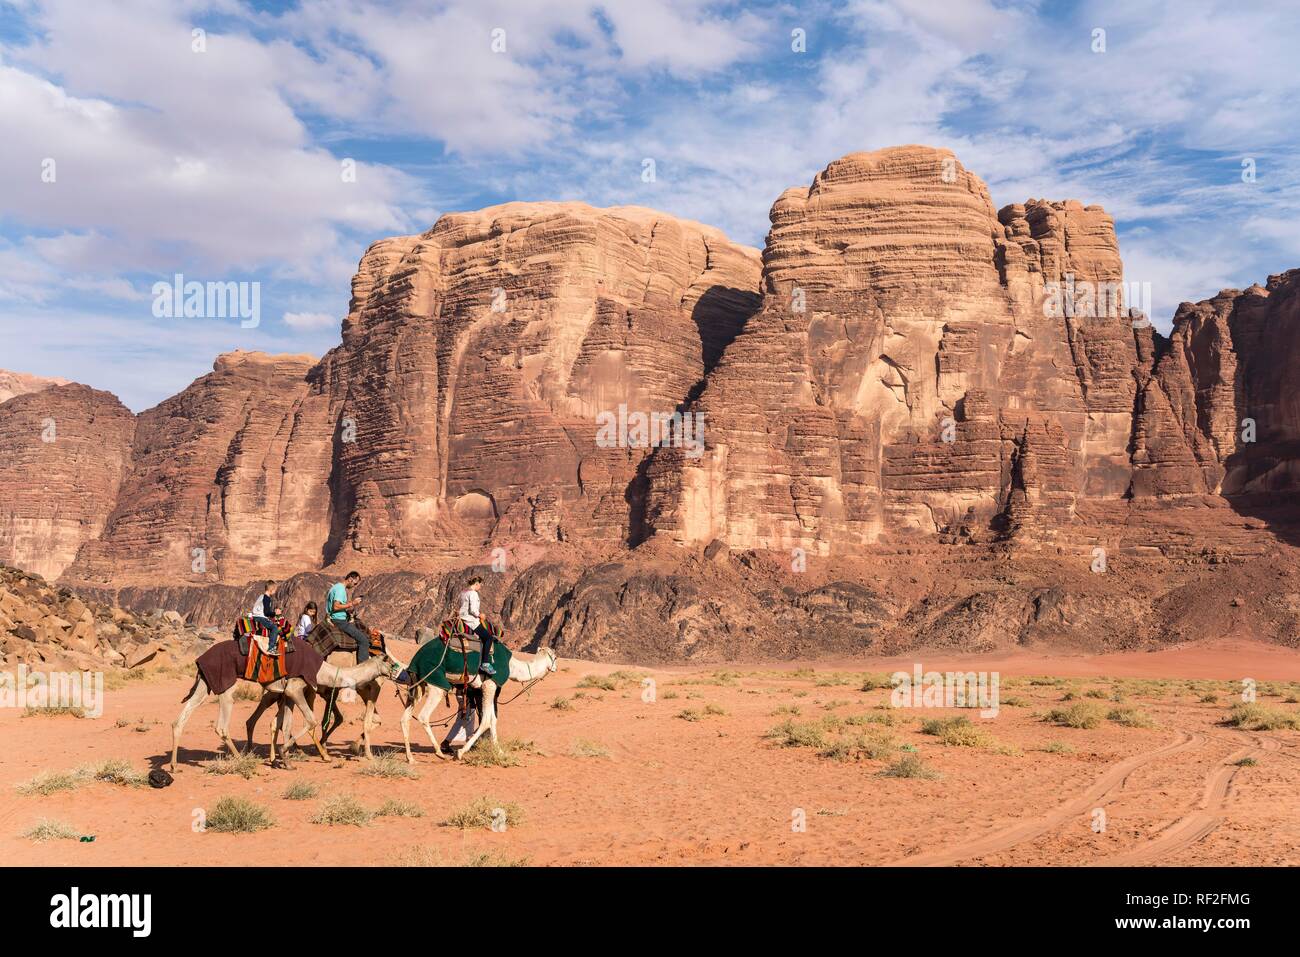 Camels with tourists in the desert Wadi Rum, Jordan Stock Photo